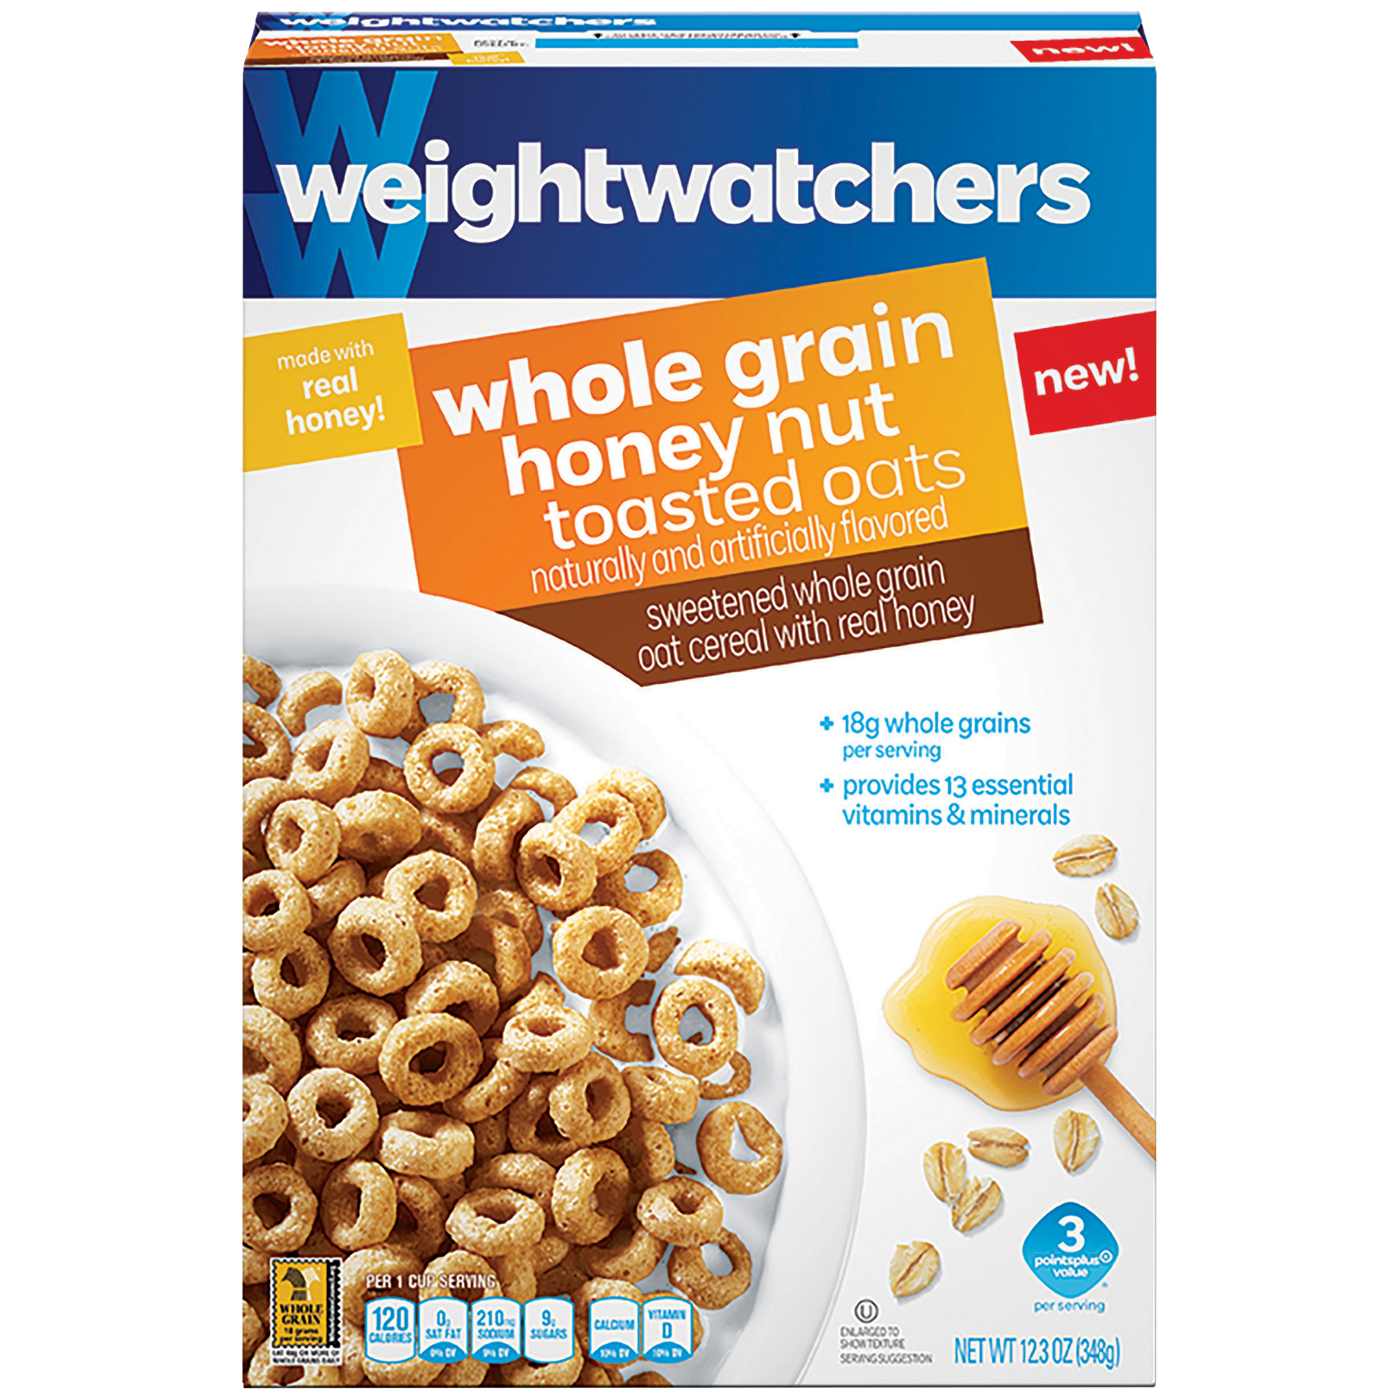 Weight Watchers Honey Nut Toasted Oats; image 2 of 2